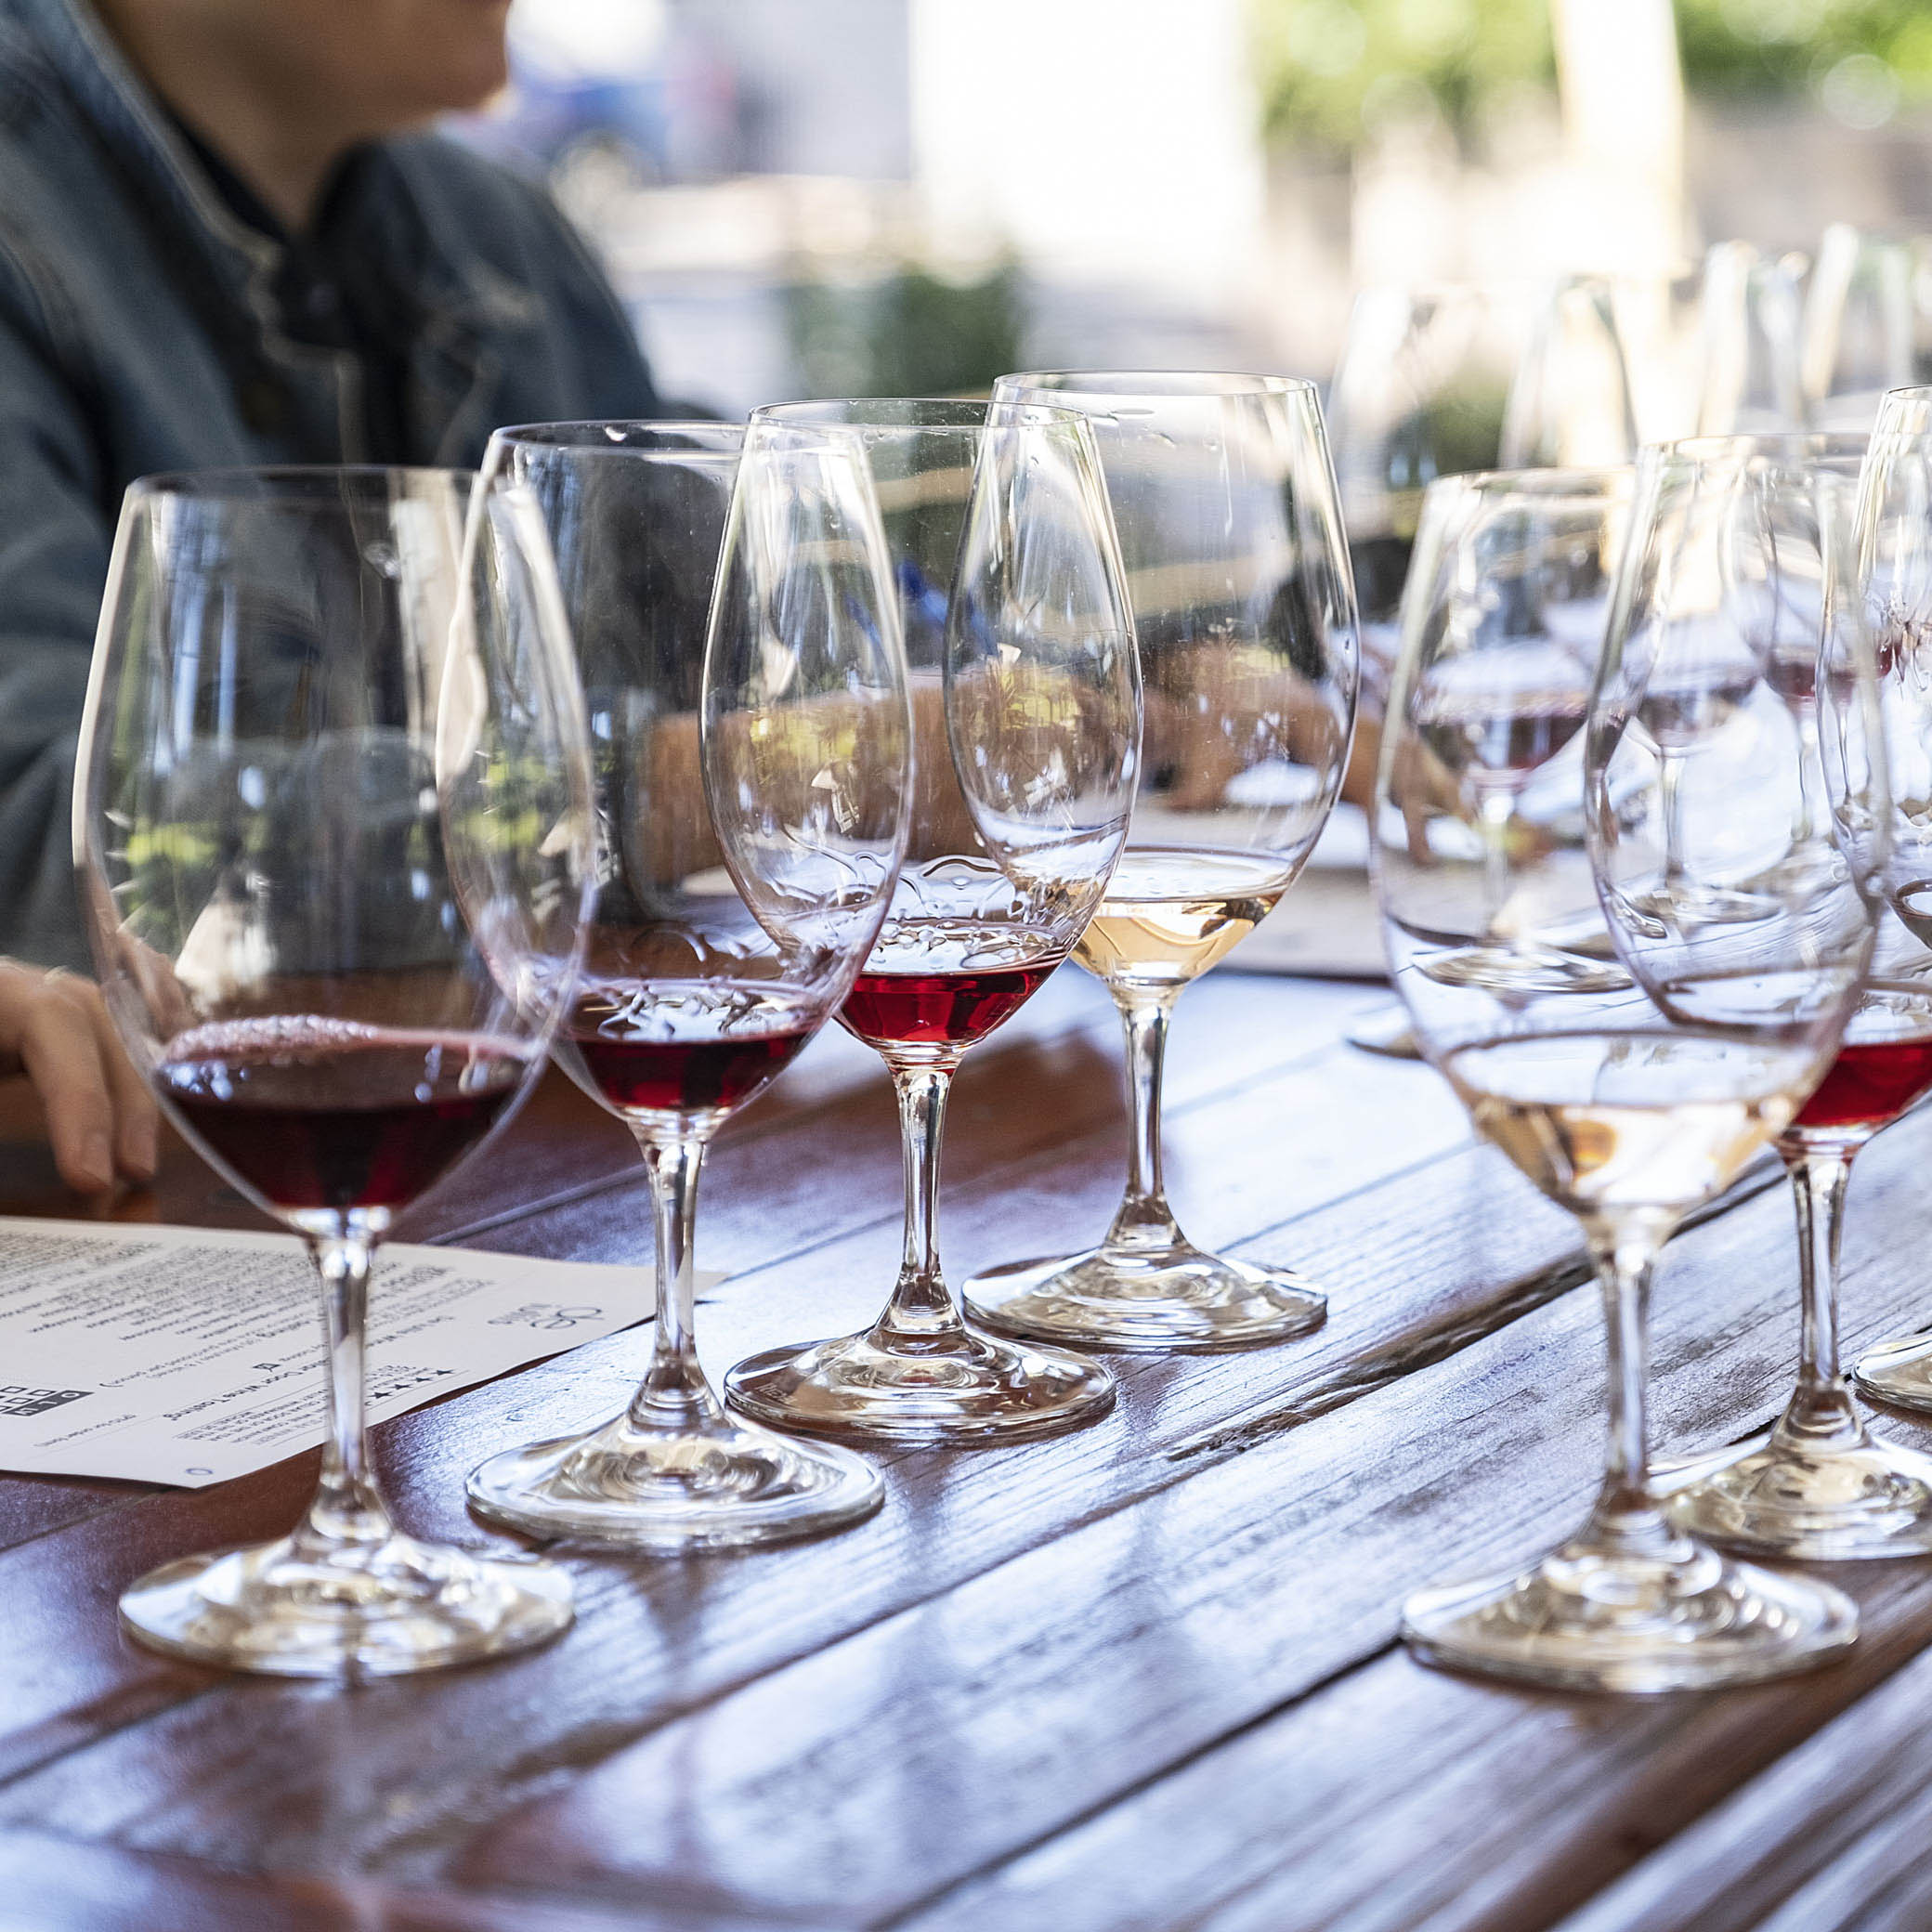 Want to discover the best winery tour in the Hunter Valley?